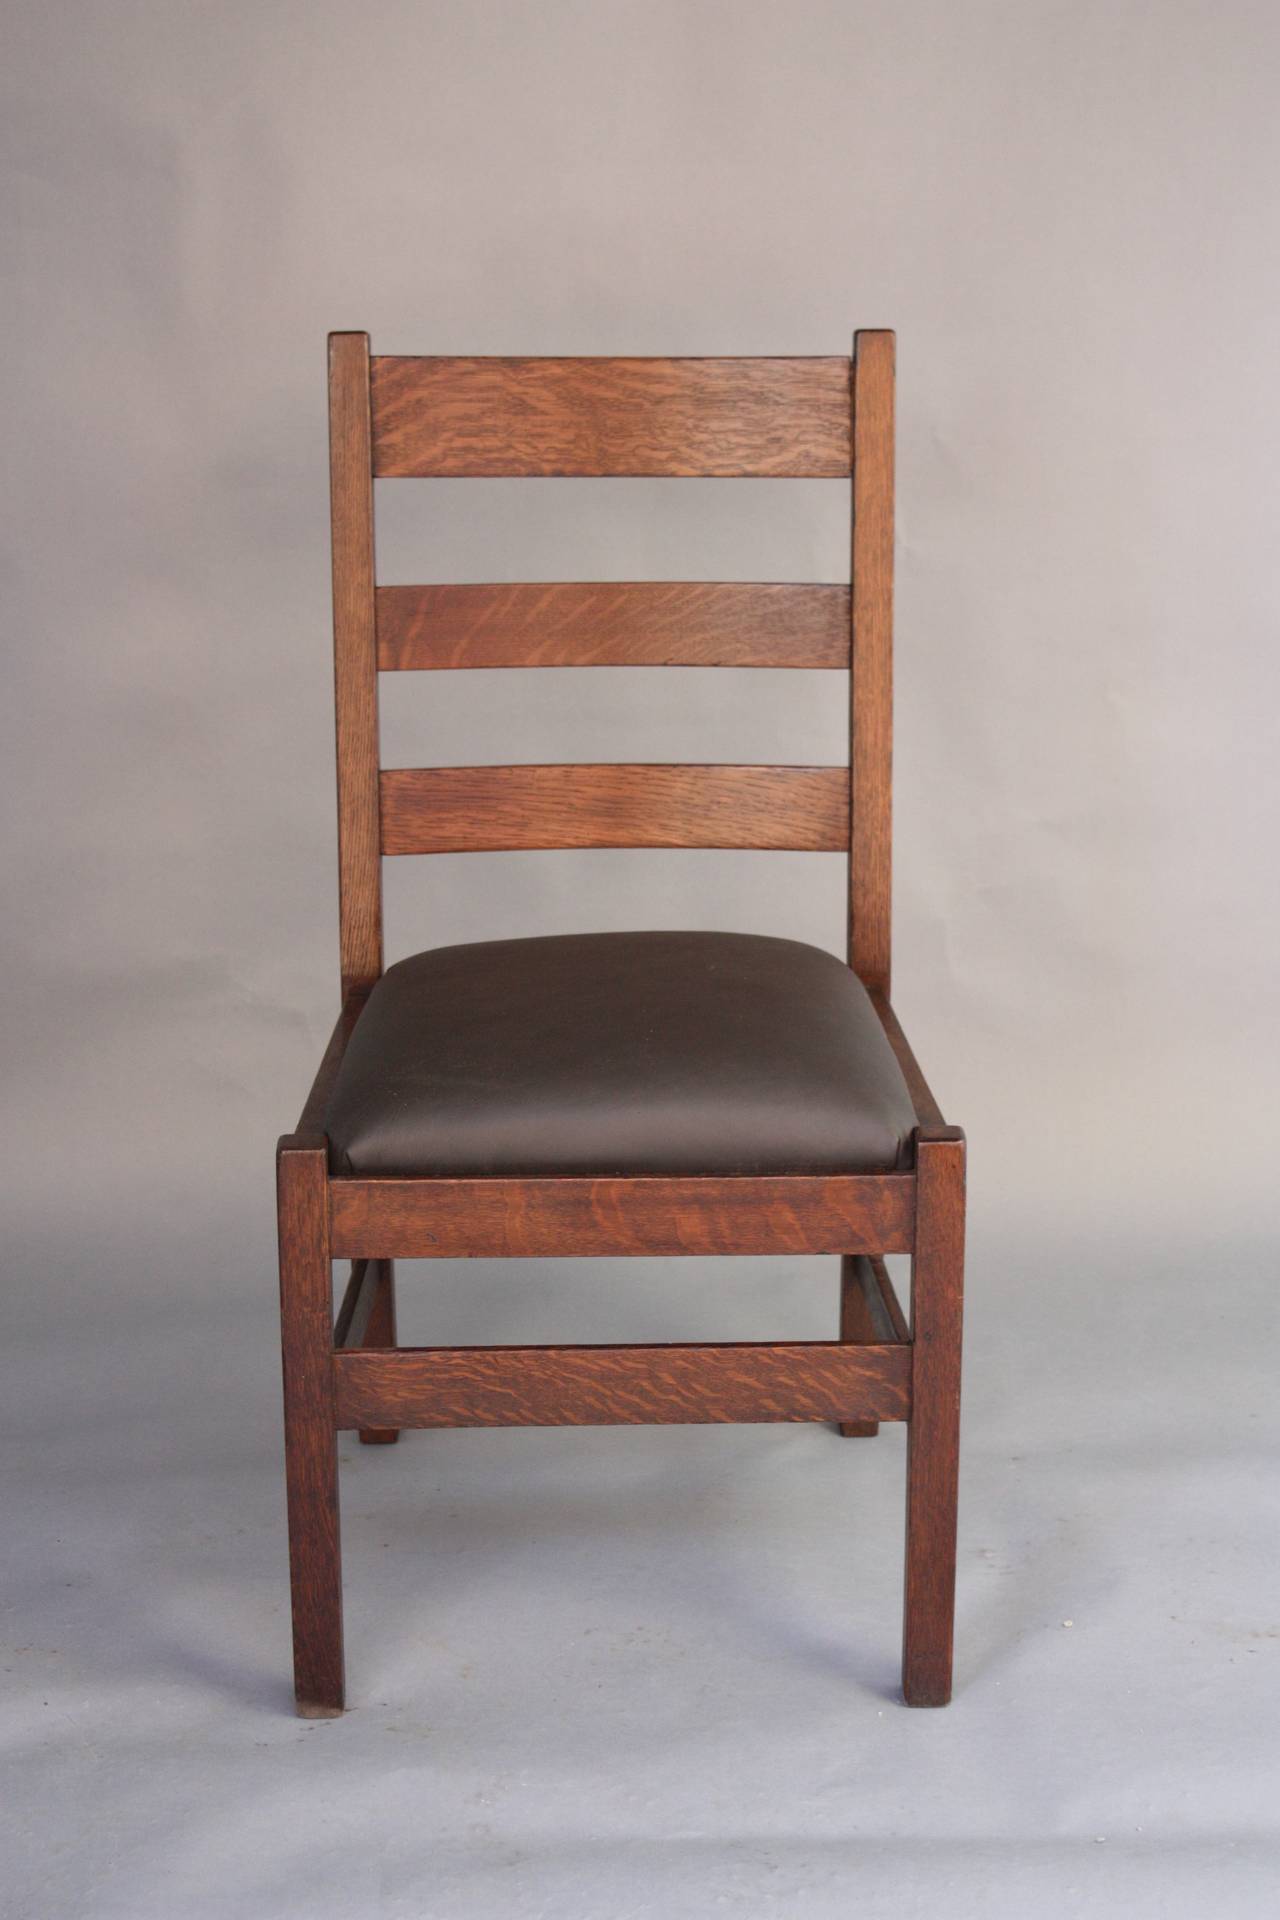 Circa 1910. The Stickley and Brandt Company was established by Charles Stickley and Schuler Brandt. This sturdy antique chair has new leather and the original label.